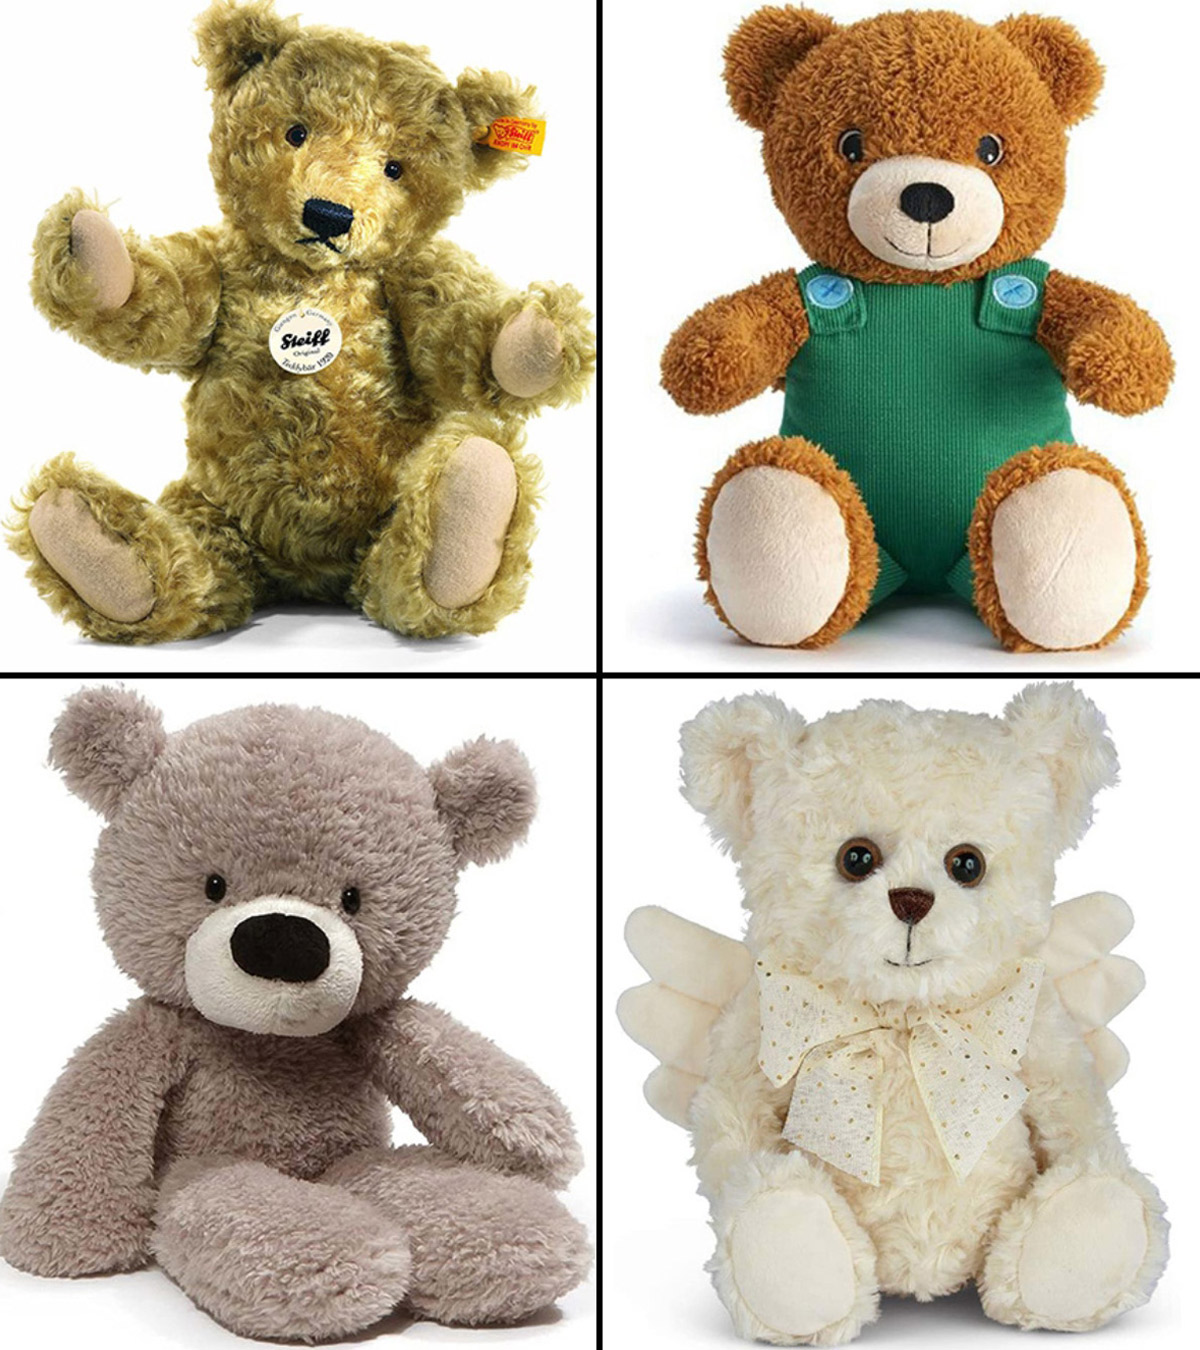 Top 10 Most Expensive Teddy Bears in the world